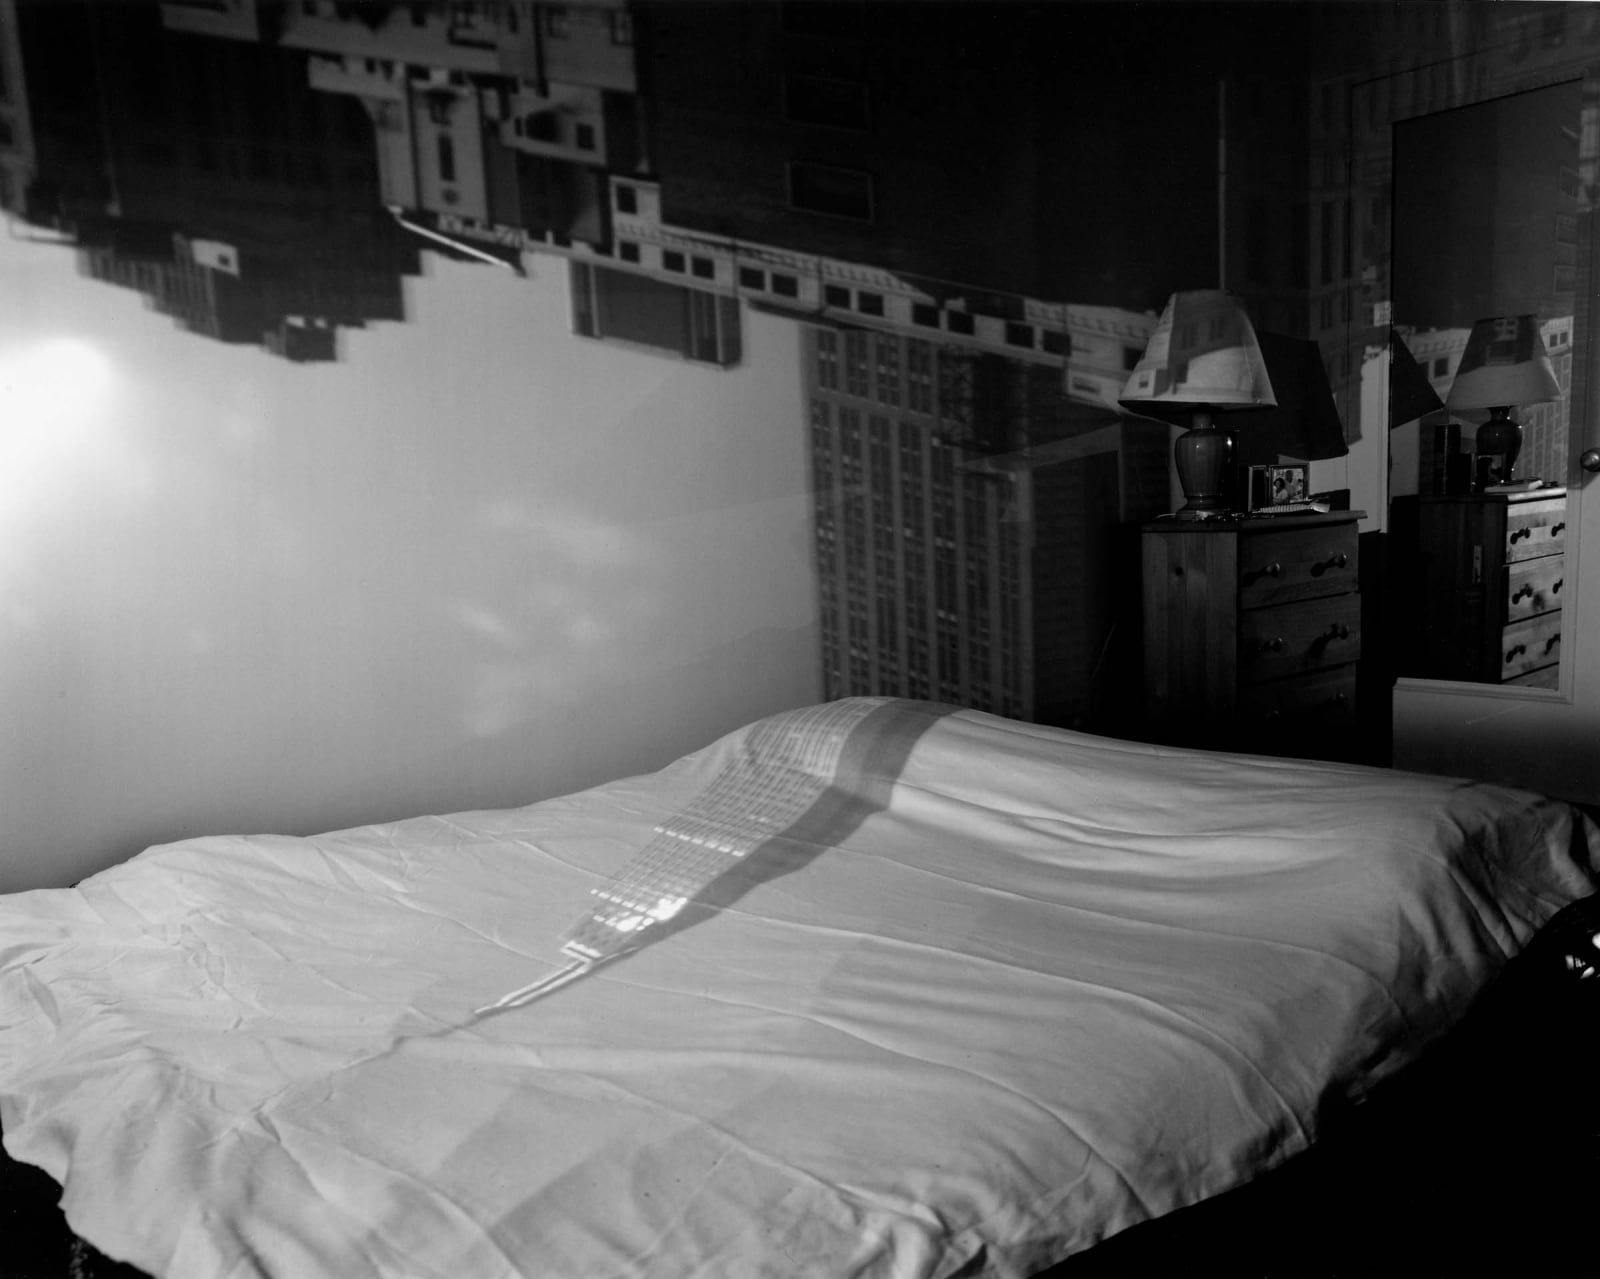 Abelardo Morell Camera Obscura of the Empire State Building in bedroom on bed black and white